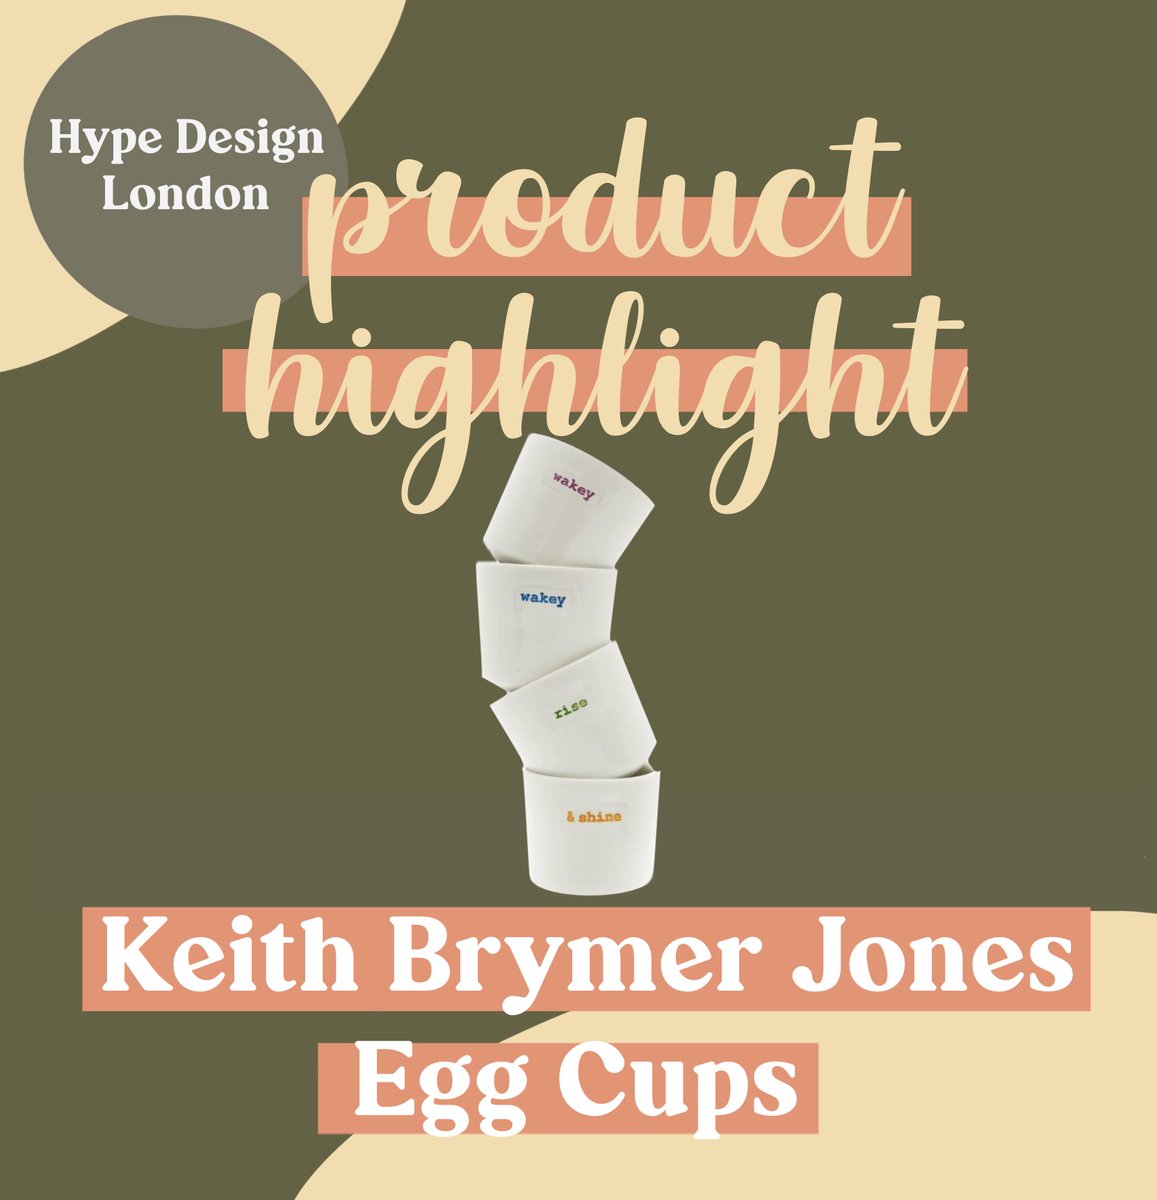 Product: Keith Brymer Jones Egg Cups Set of 4
Price: £26.92
Perfect For: Dippy Egg and Soldiers
Available at: hypedesignlondon.co.uk
@keithbrymerjones 

#HypeDesign #HypeDesignLondon #Lifestyle #Home #InteriorDesign #GiftIdeas  #HomeDecor #HomeInteriors